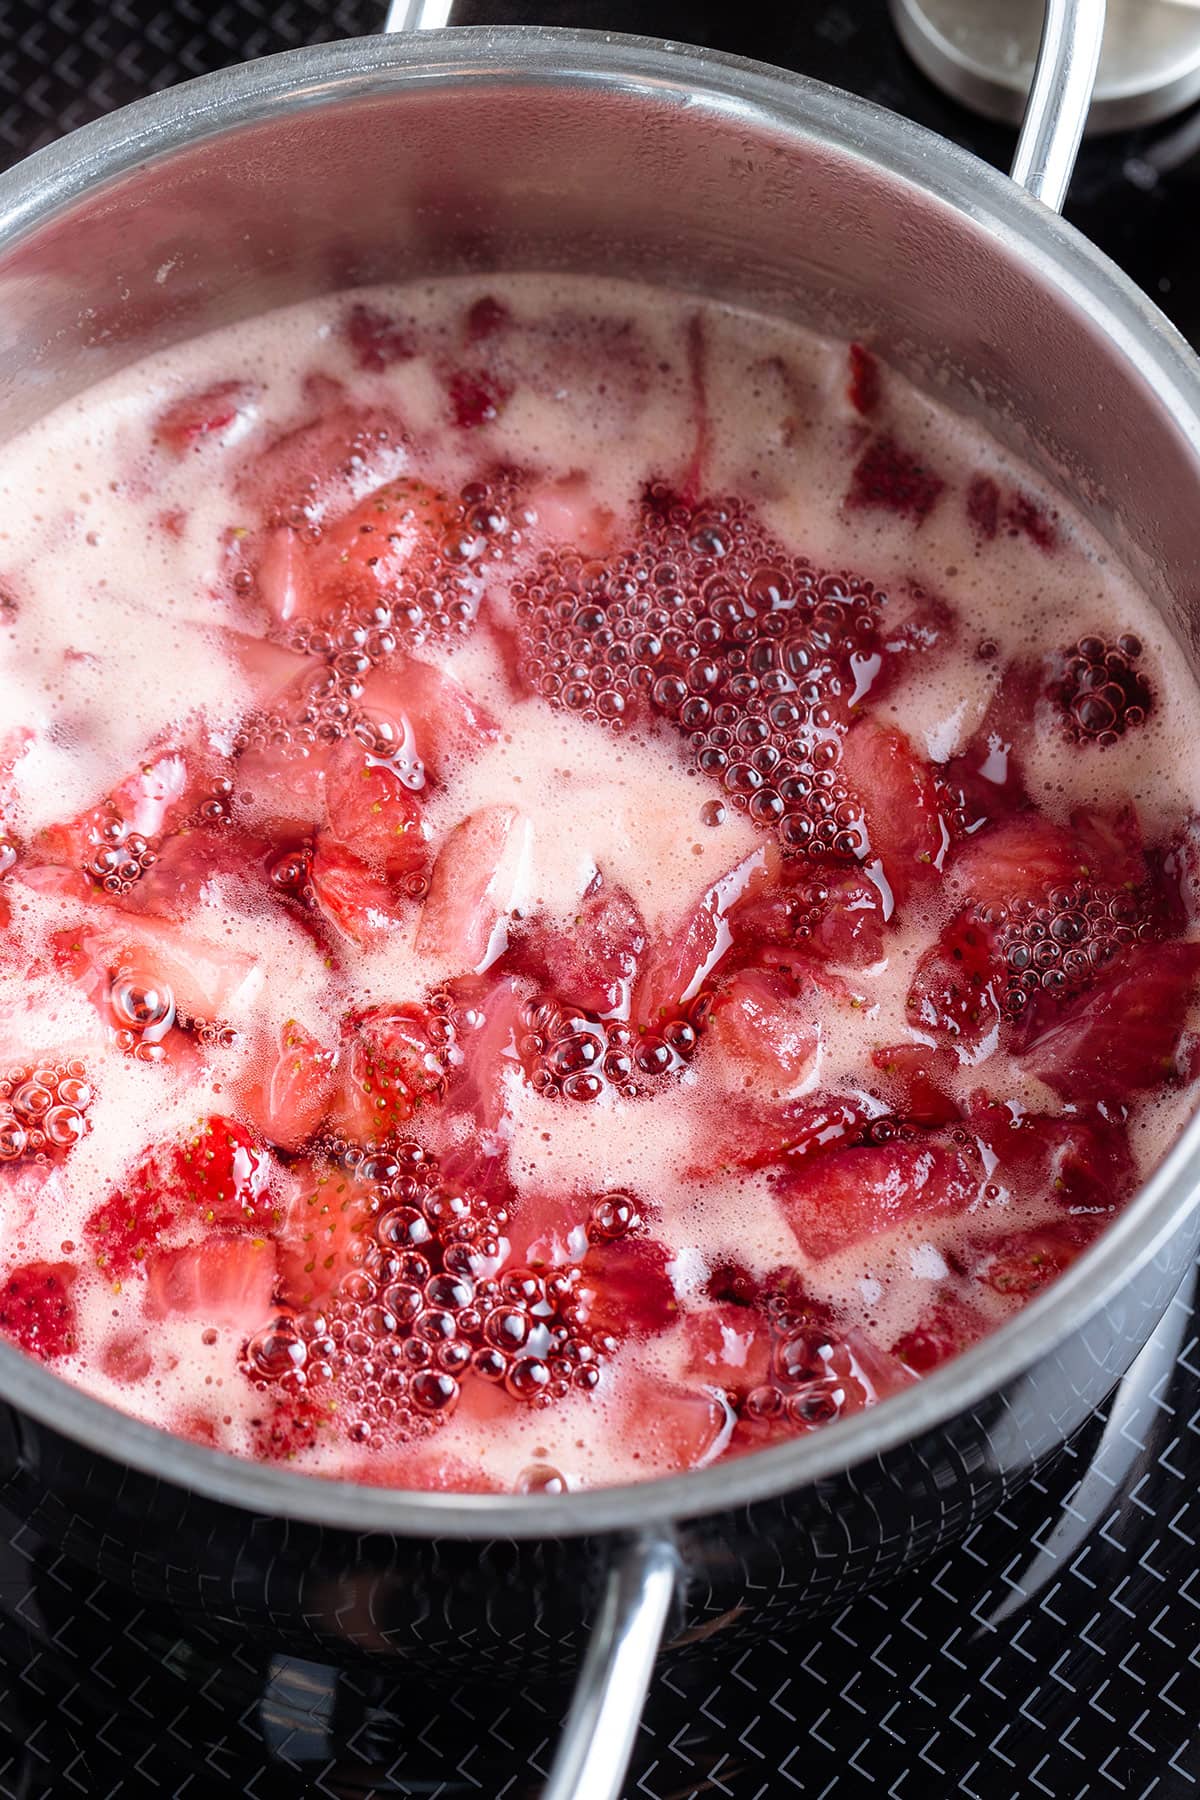 Chopped strawberries simmering with water and sugar on the stove.